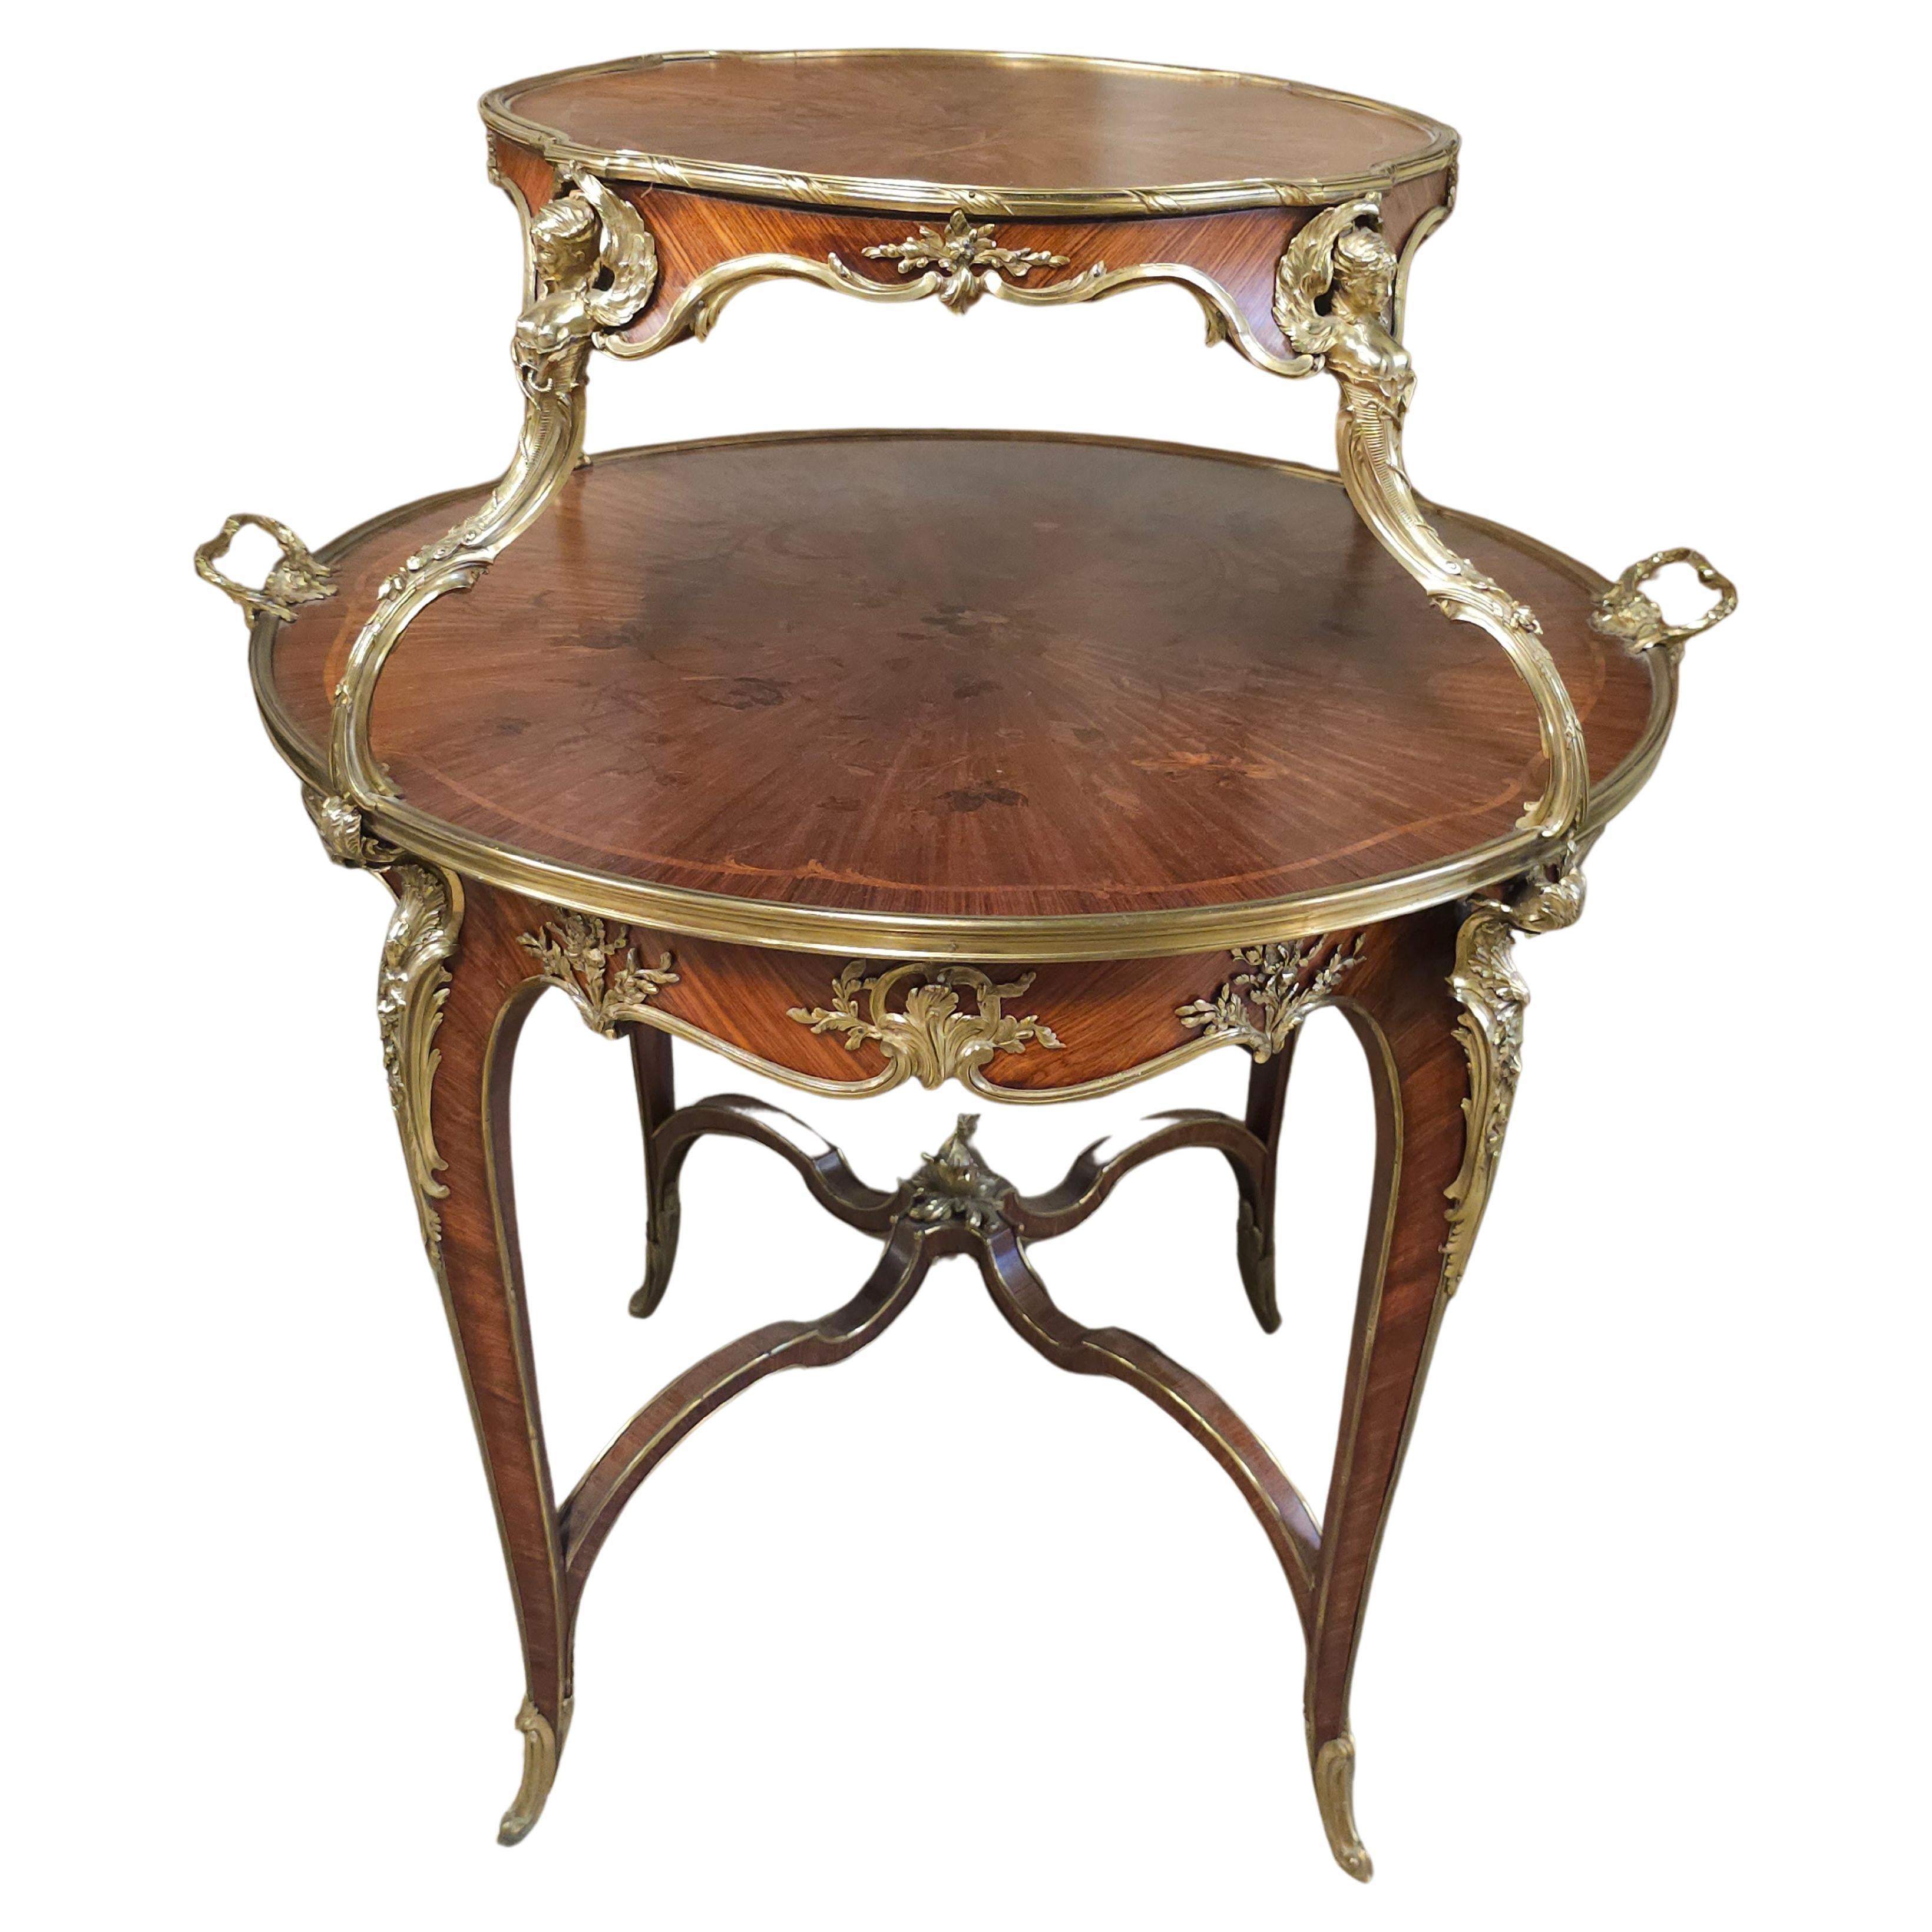 19th Century 19th C. Joseph E. Zwiemer Kingwood, Satine and Bois de Bout Marquetry Tea Table For Sale